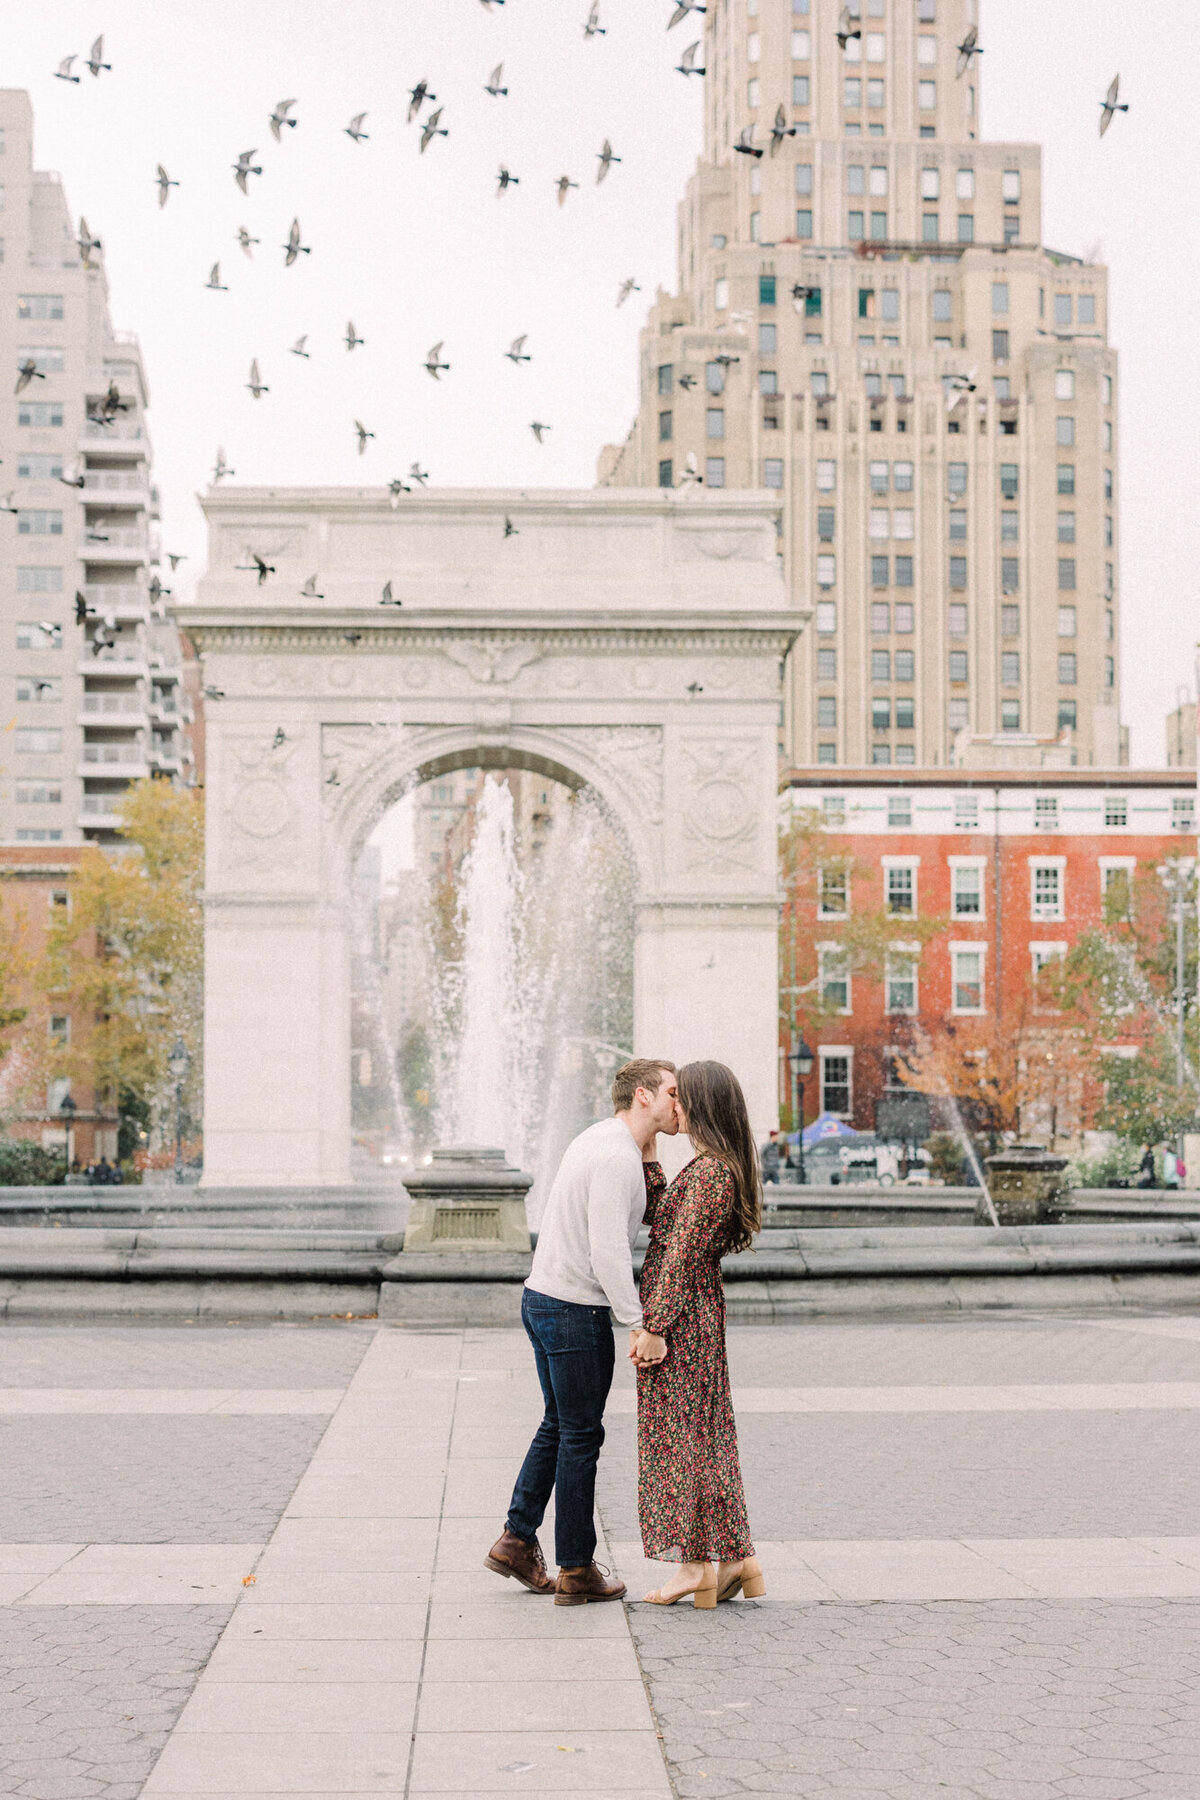 An engagement photo taken at Washington Square Park in New York City with pigeons flying overhead